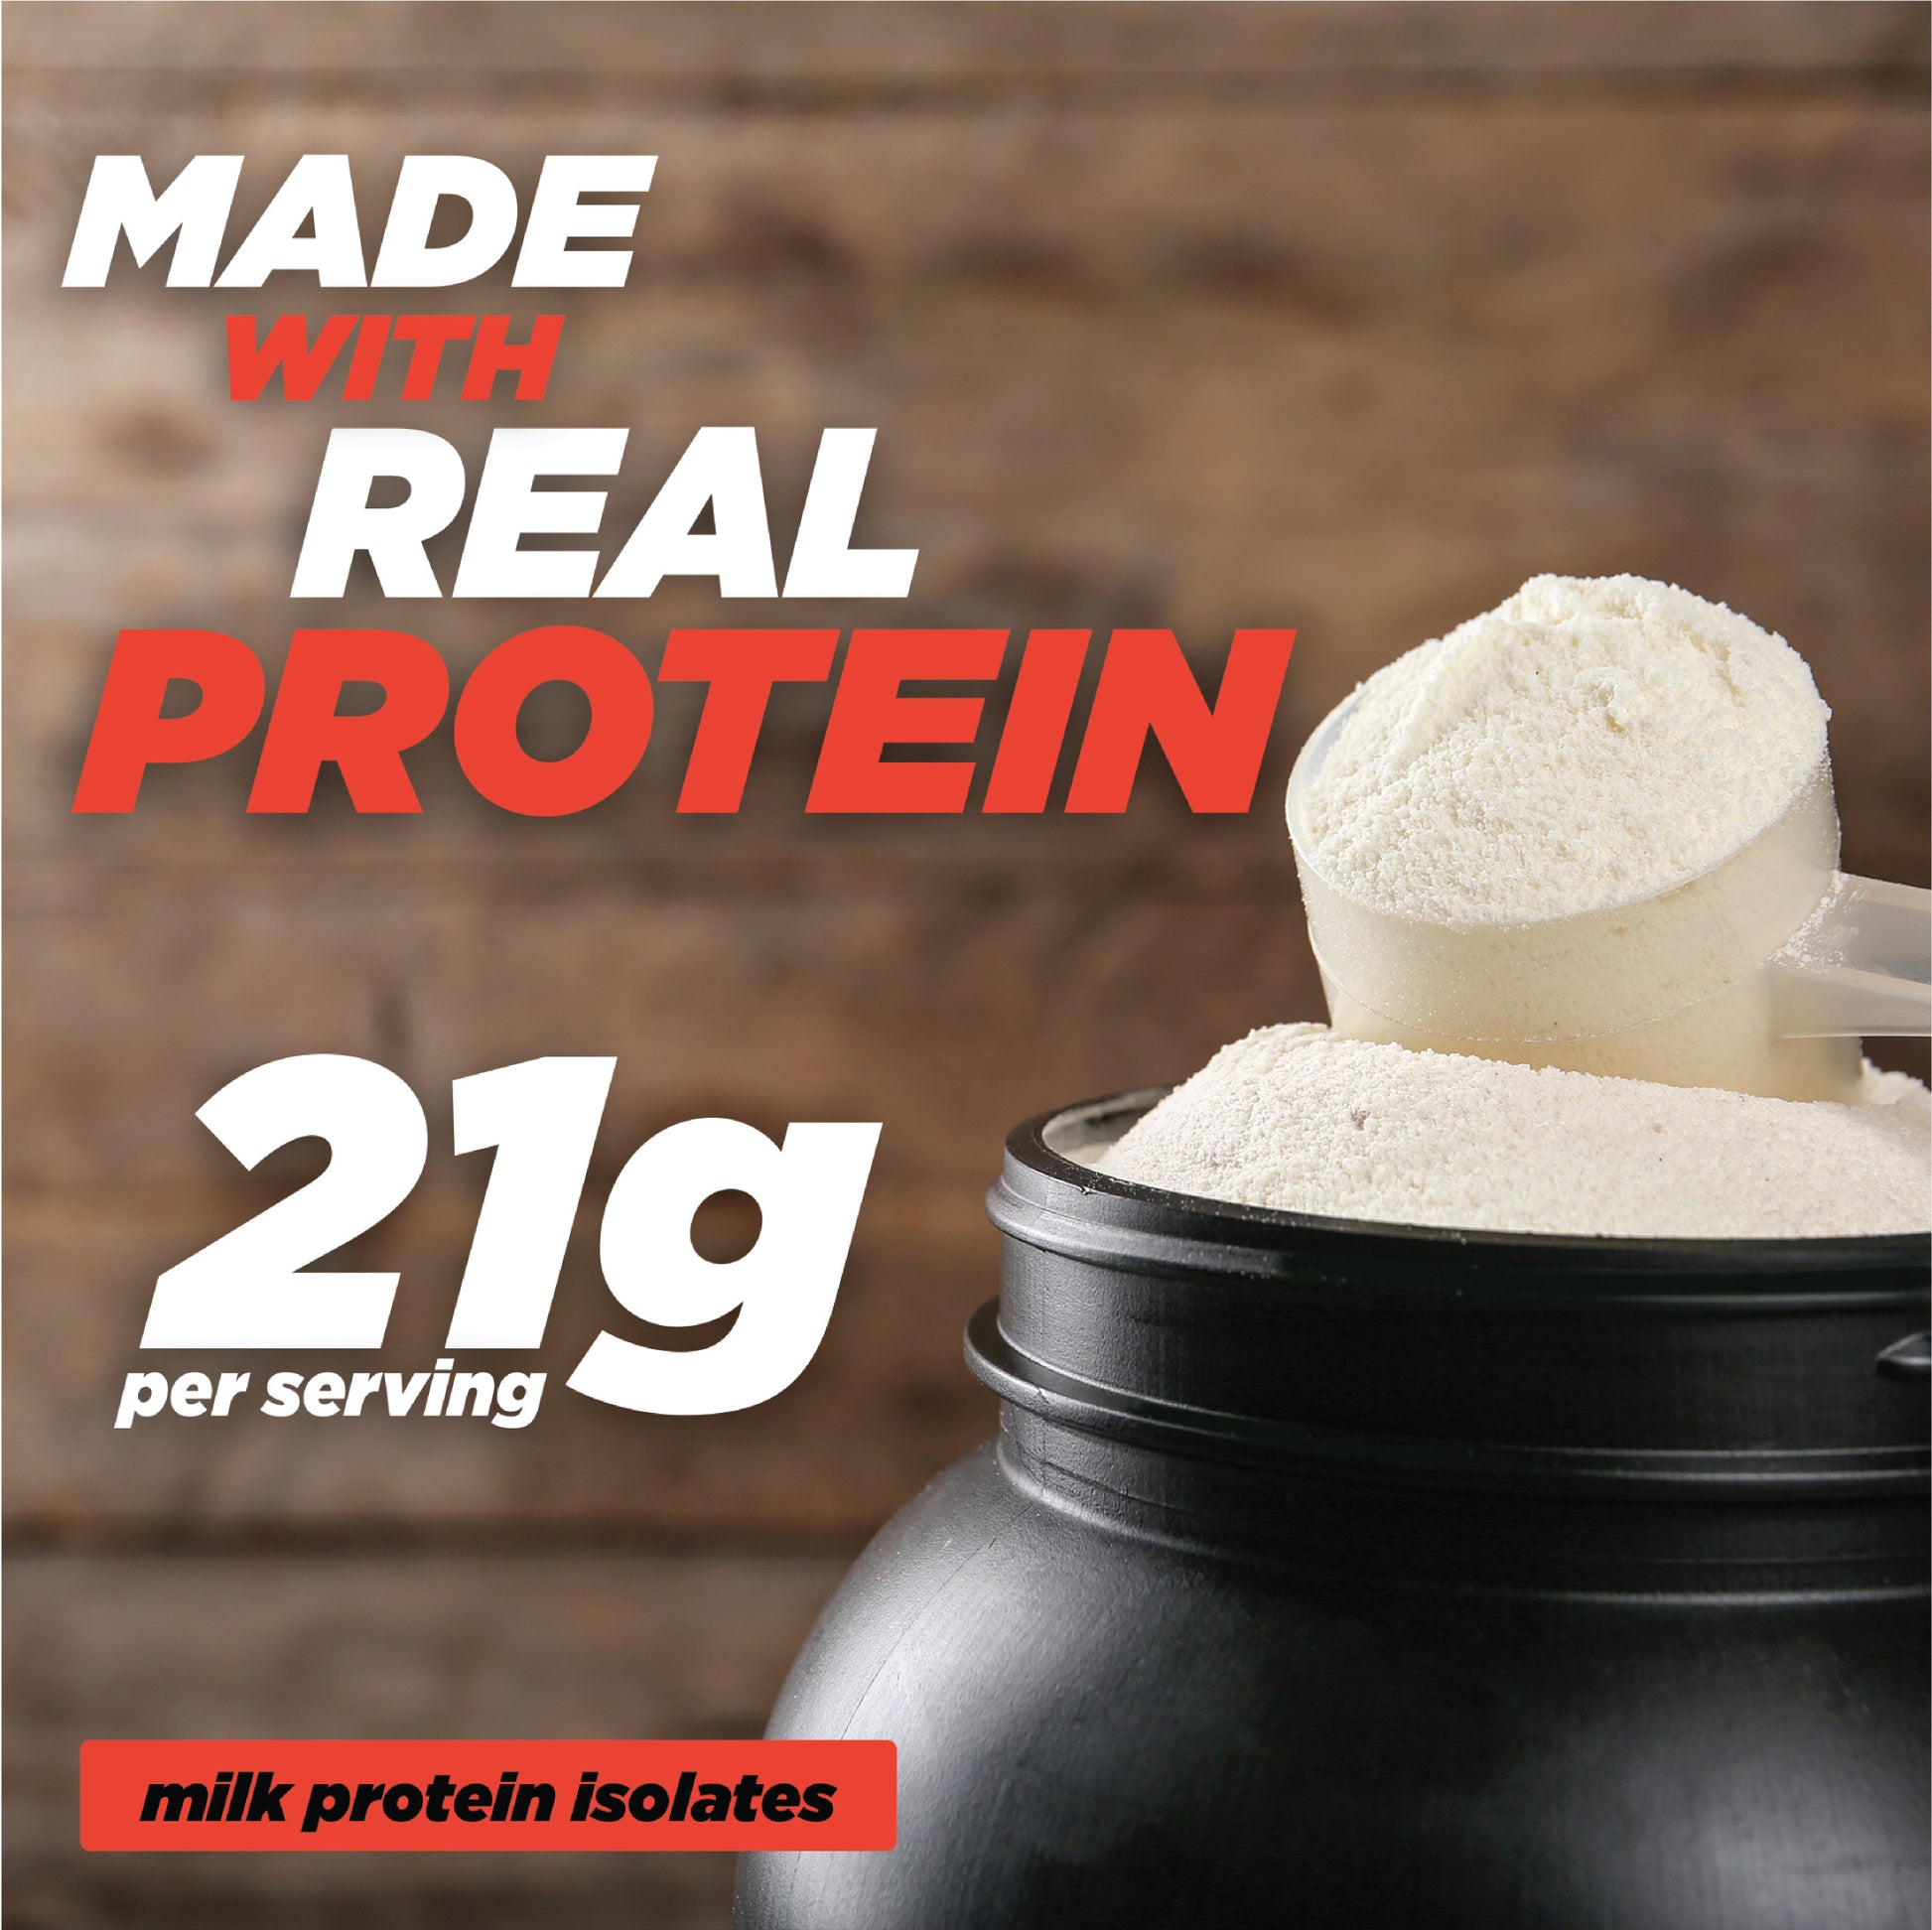 Made With Real Protein - Milk Protein Isolate